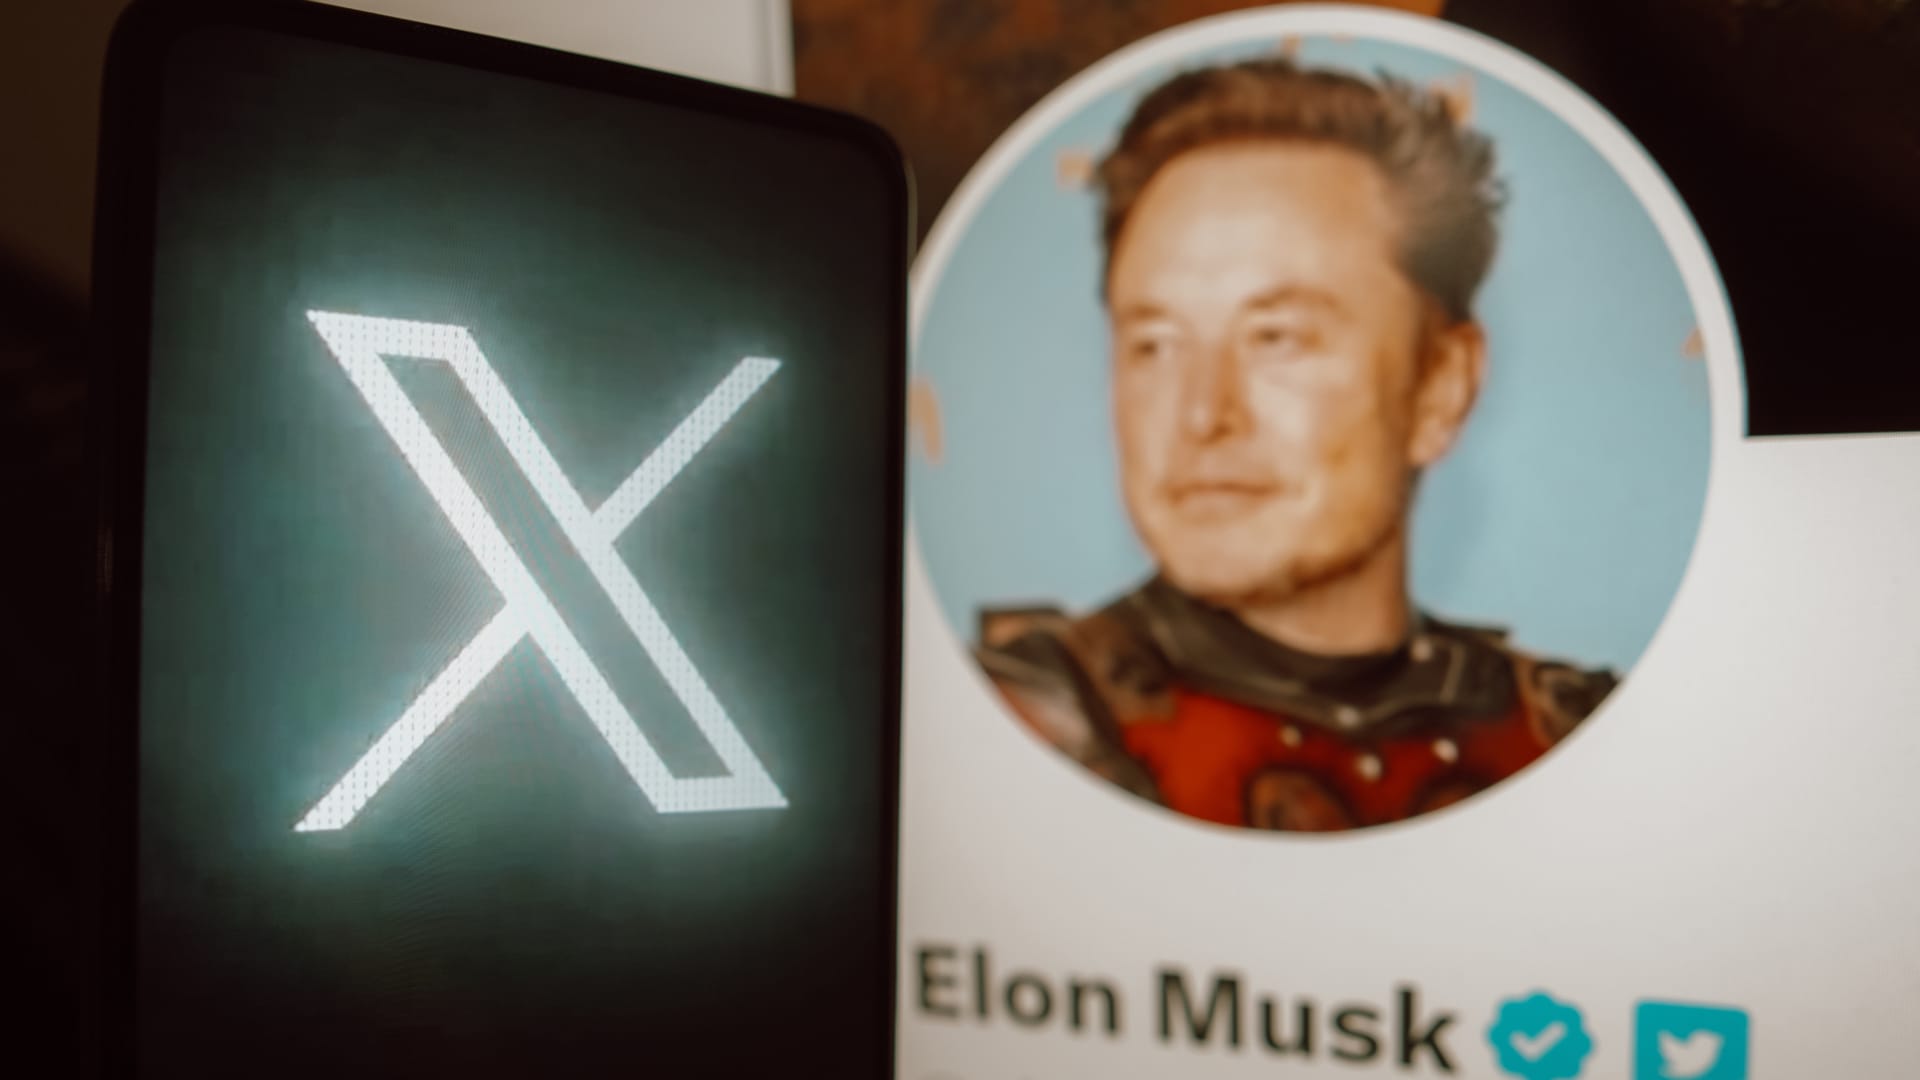 Elon Musk risks more damage to Twitter business after name change to X